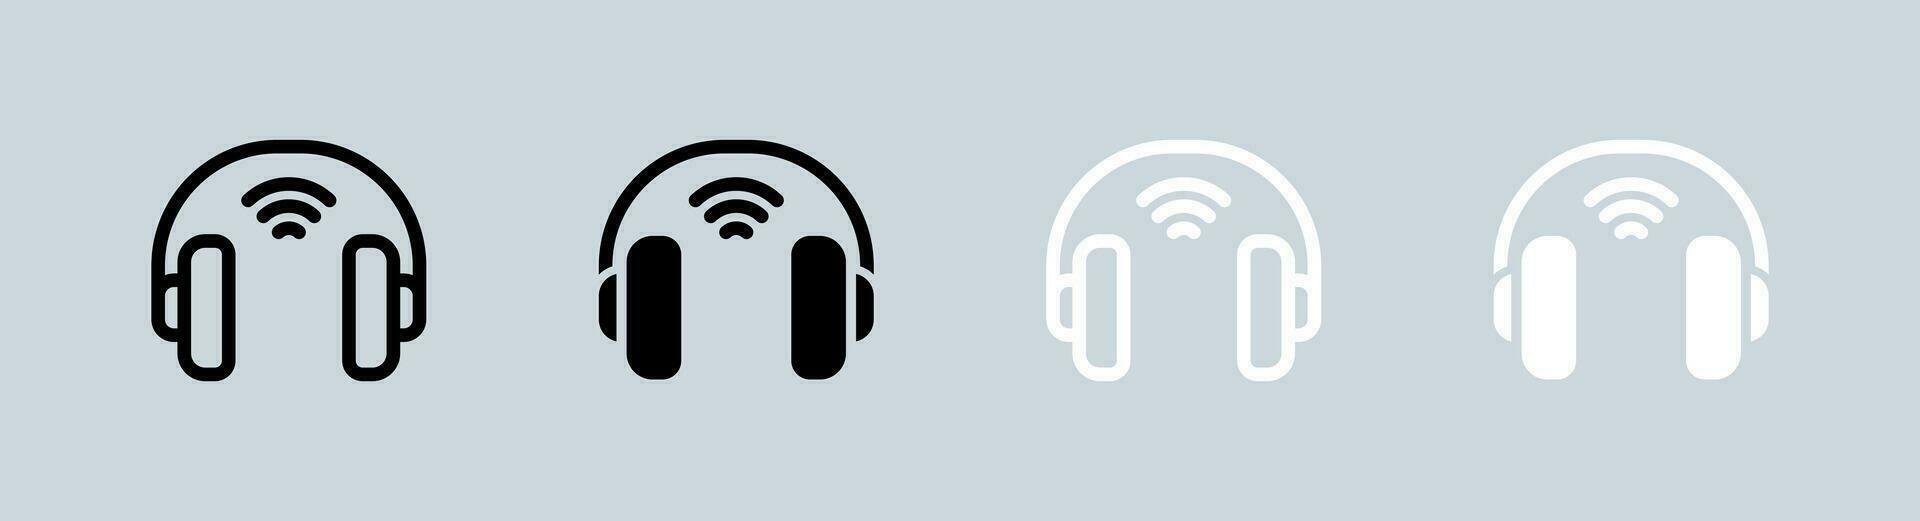 Wireless headphone icon set in black and white. Earphones signs vector illustration.